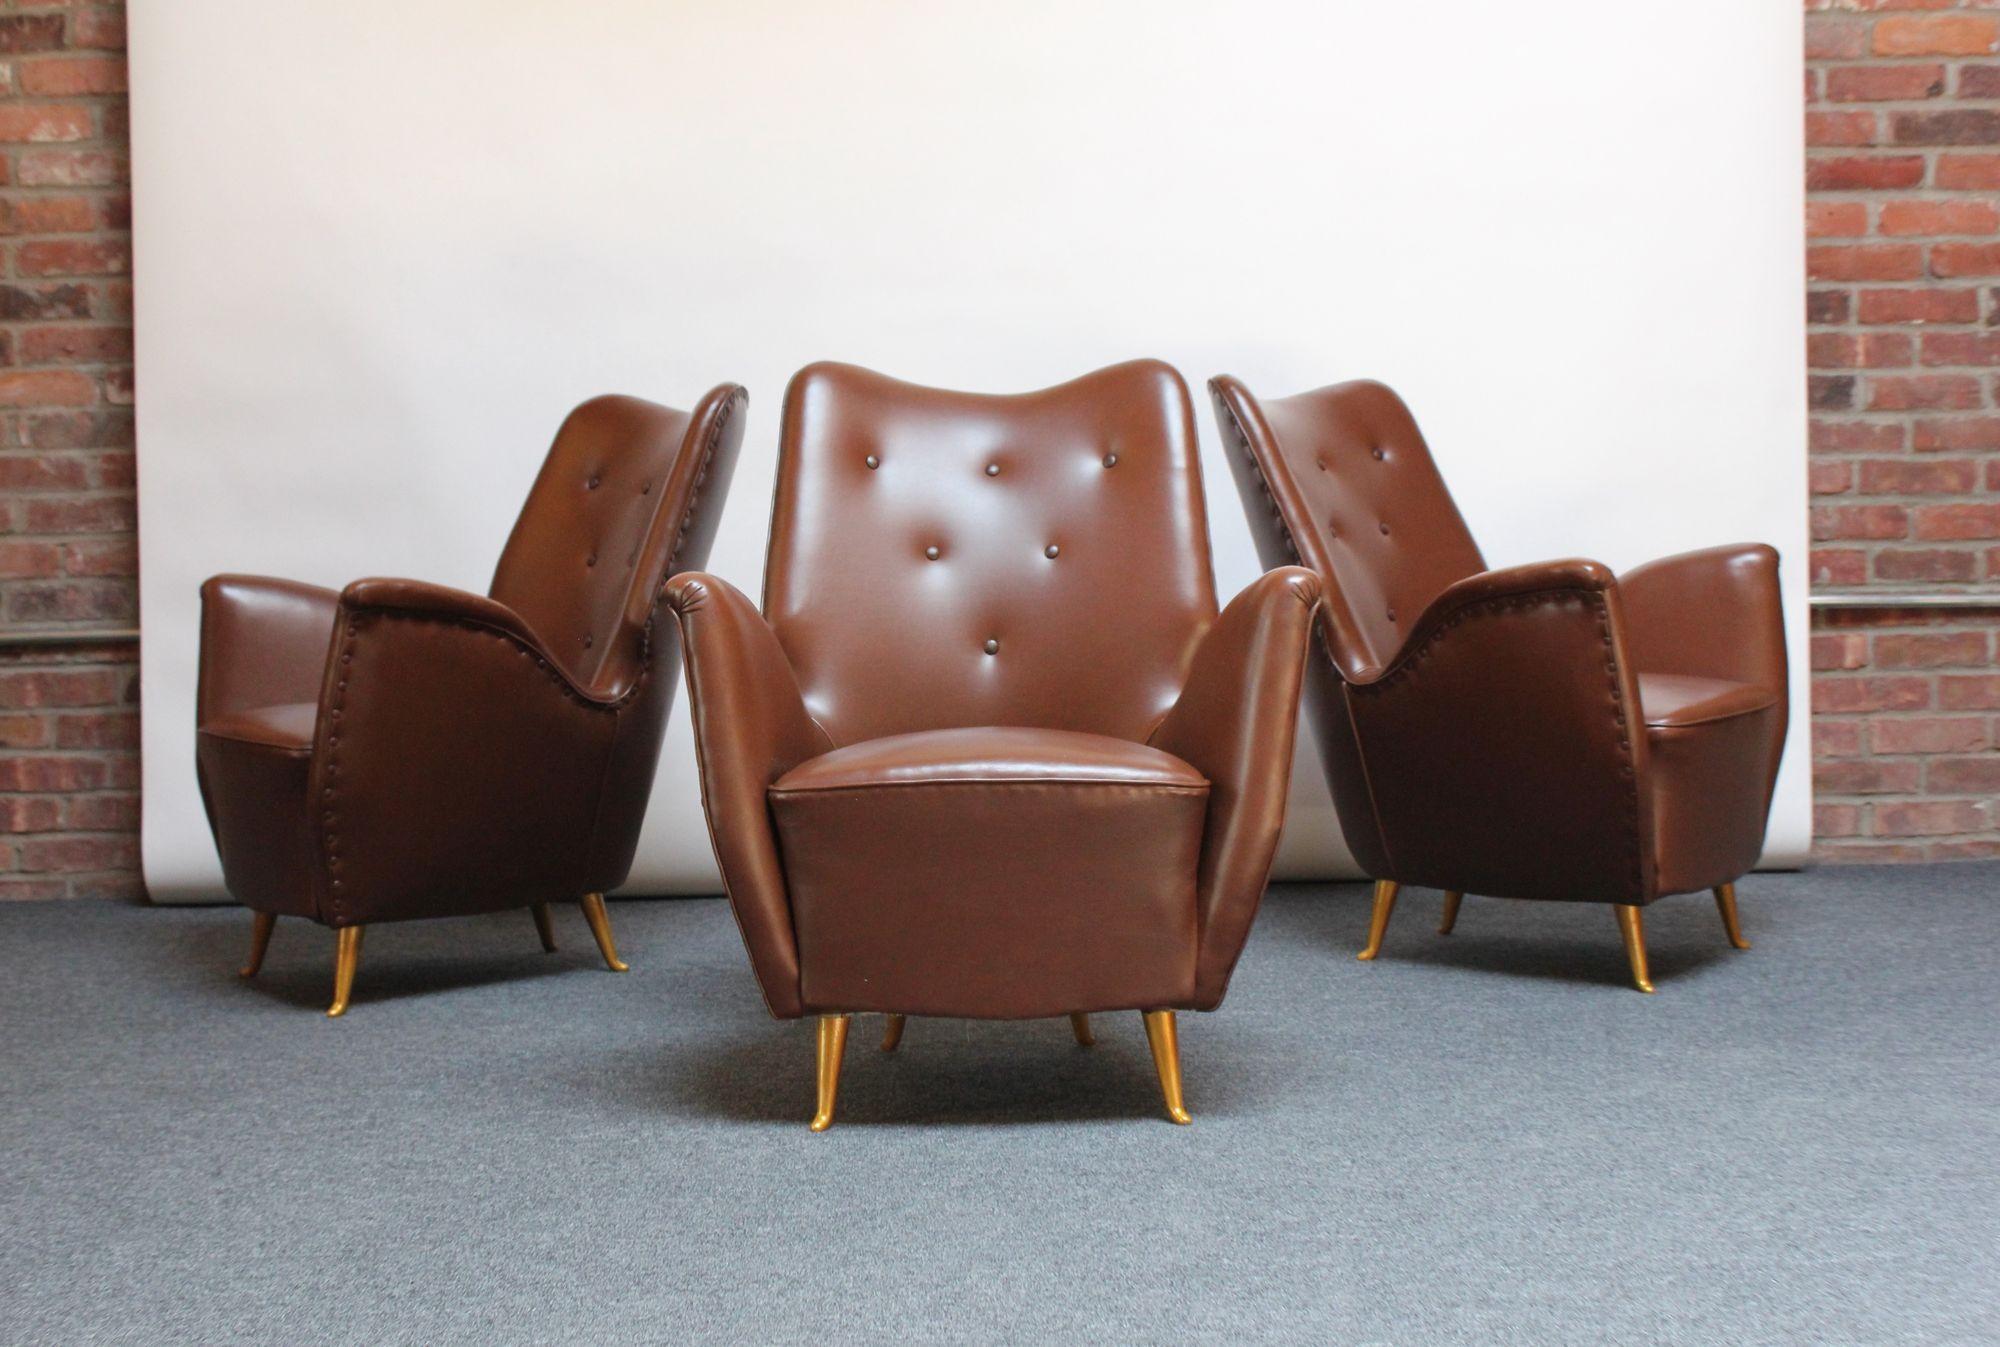 Low and petite Isa Bergamo armchair attributed to Gio Ponti characterized by pronounced/exaggeratedly sculpted arms in chocolate vinyl with button tufted details (ca. 1950s, Italy).
Original spring construction present with the frame supported by